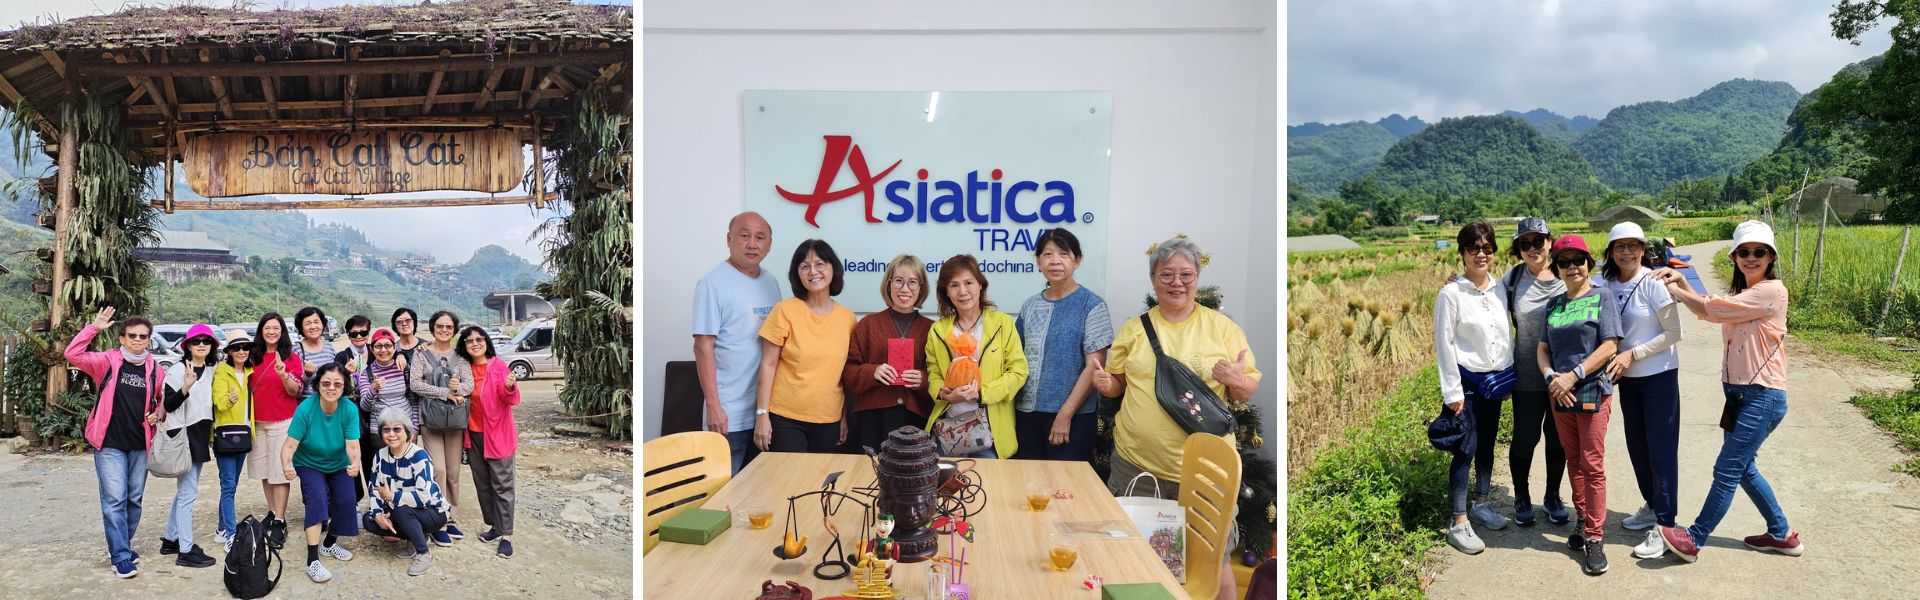 Customer reviews about Asiatica Travel